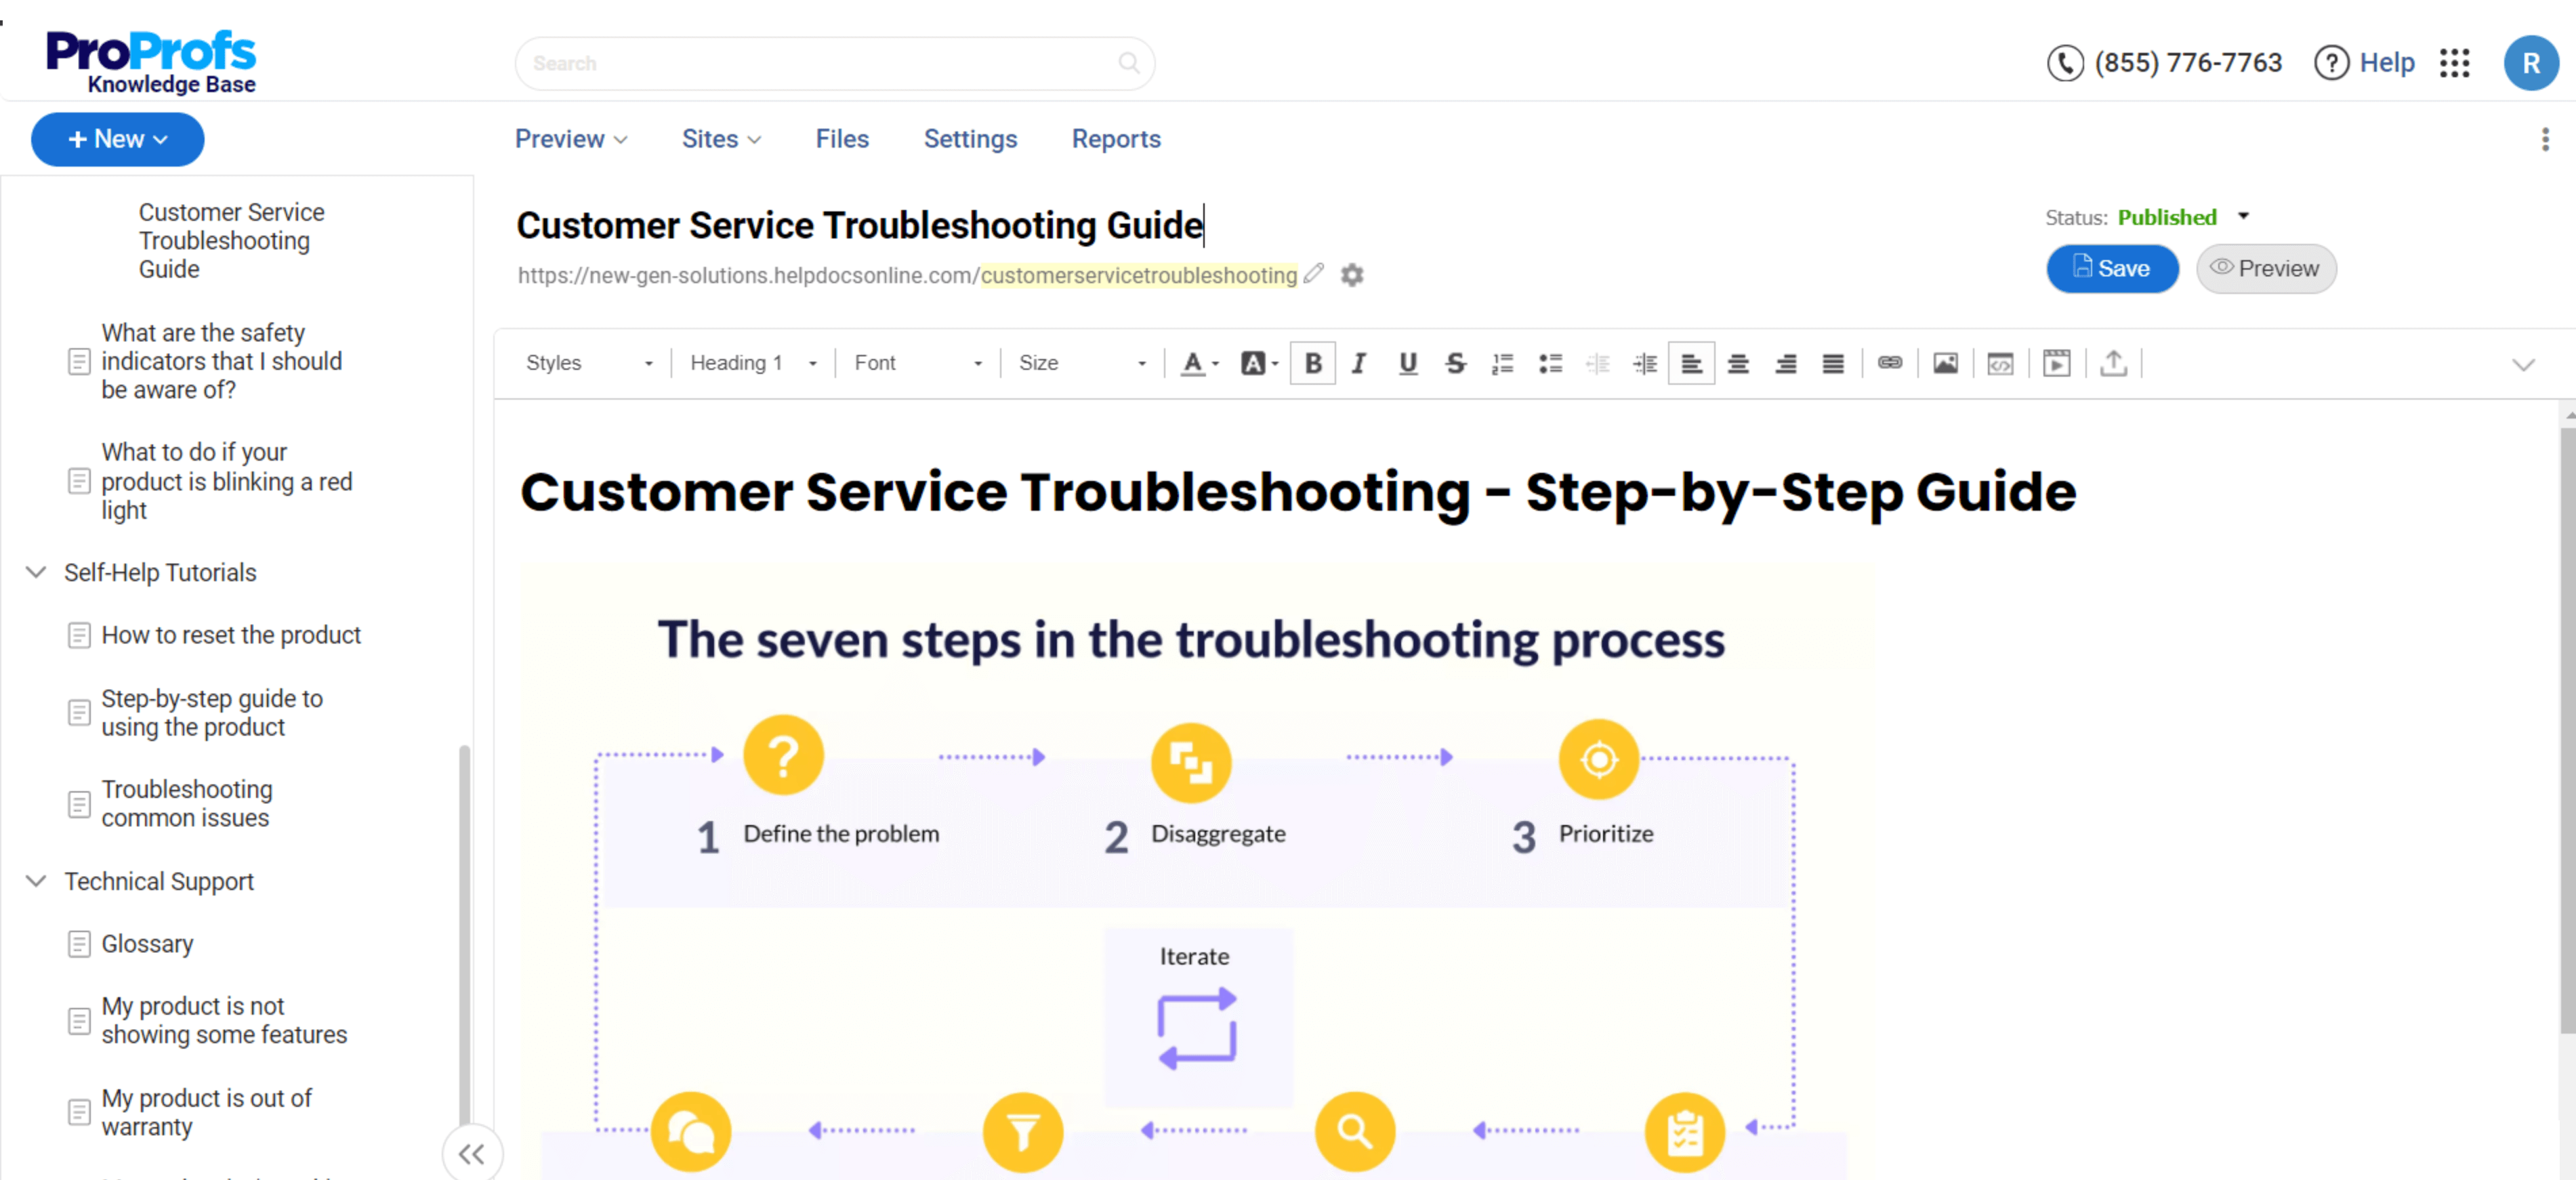 Troubleshooting Guides